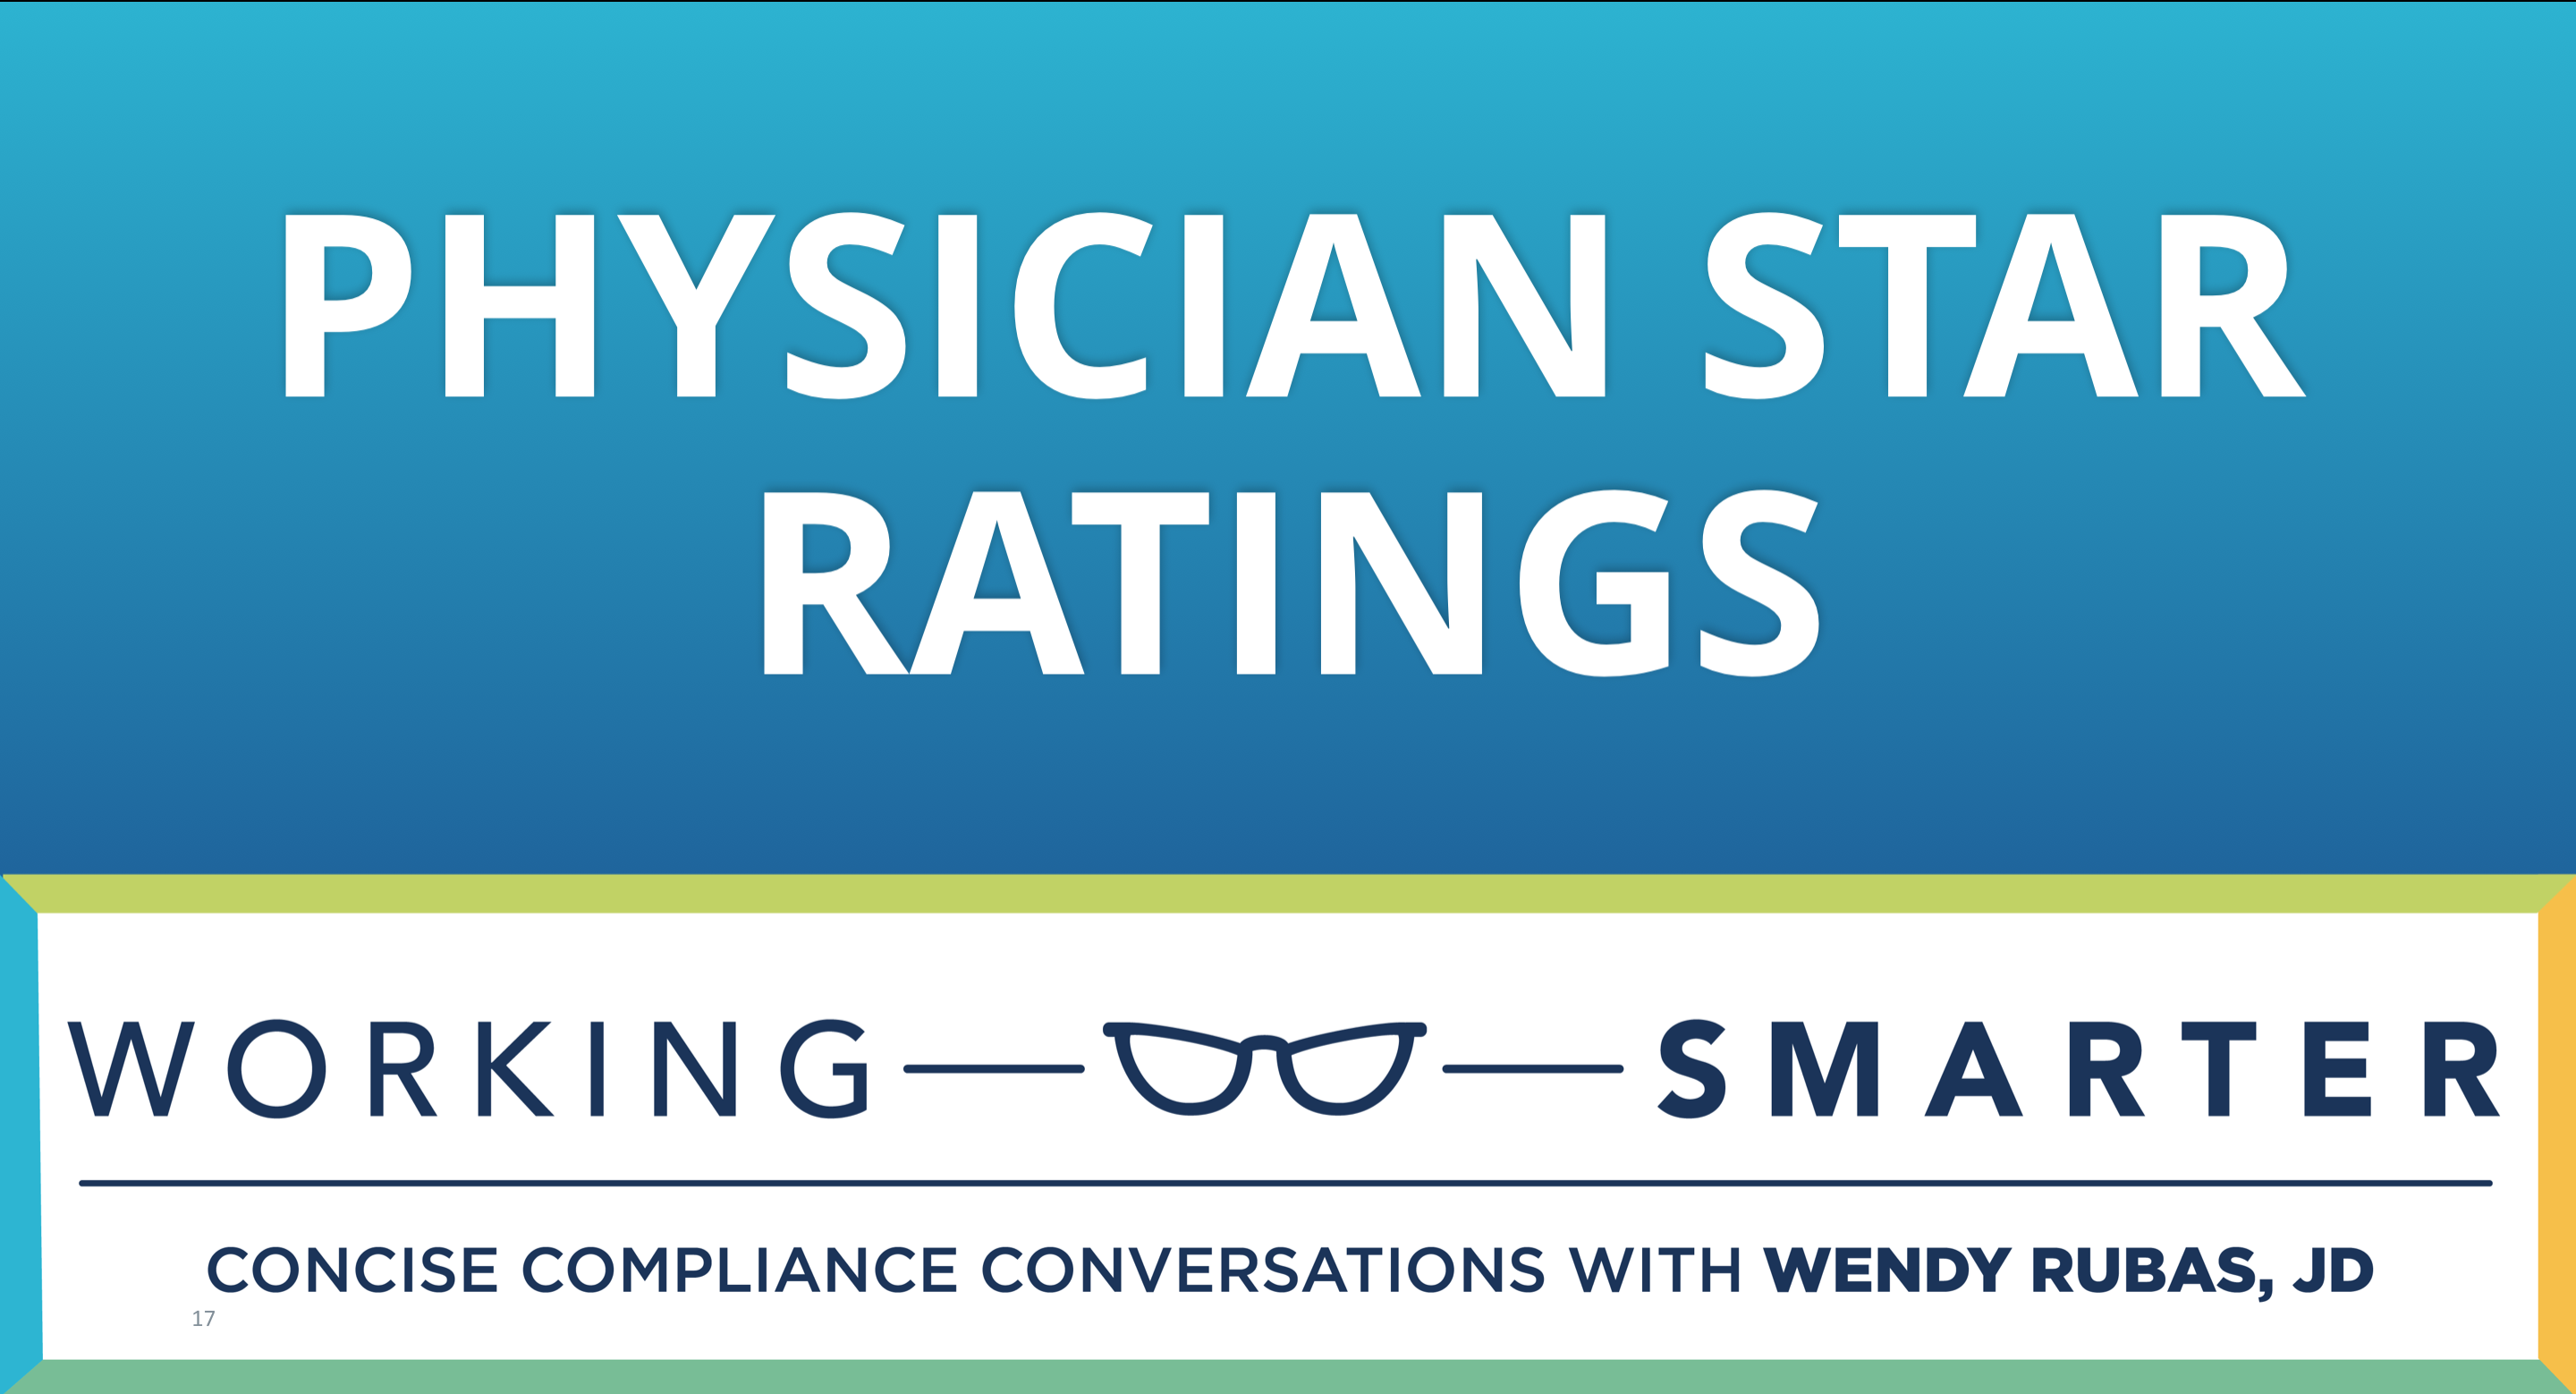 Working Smarter: Physician Star Ratings